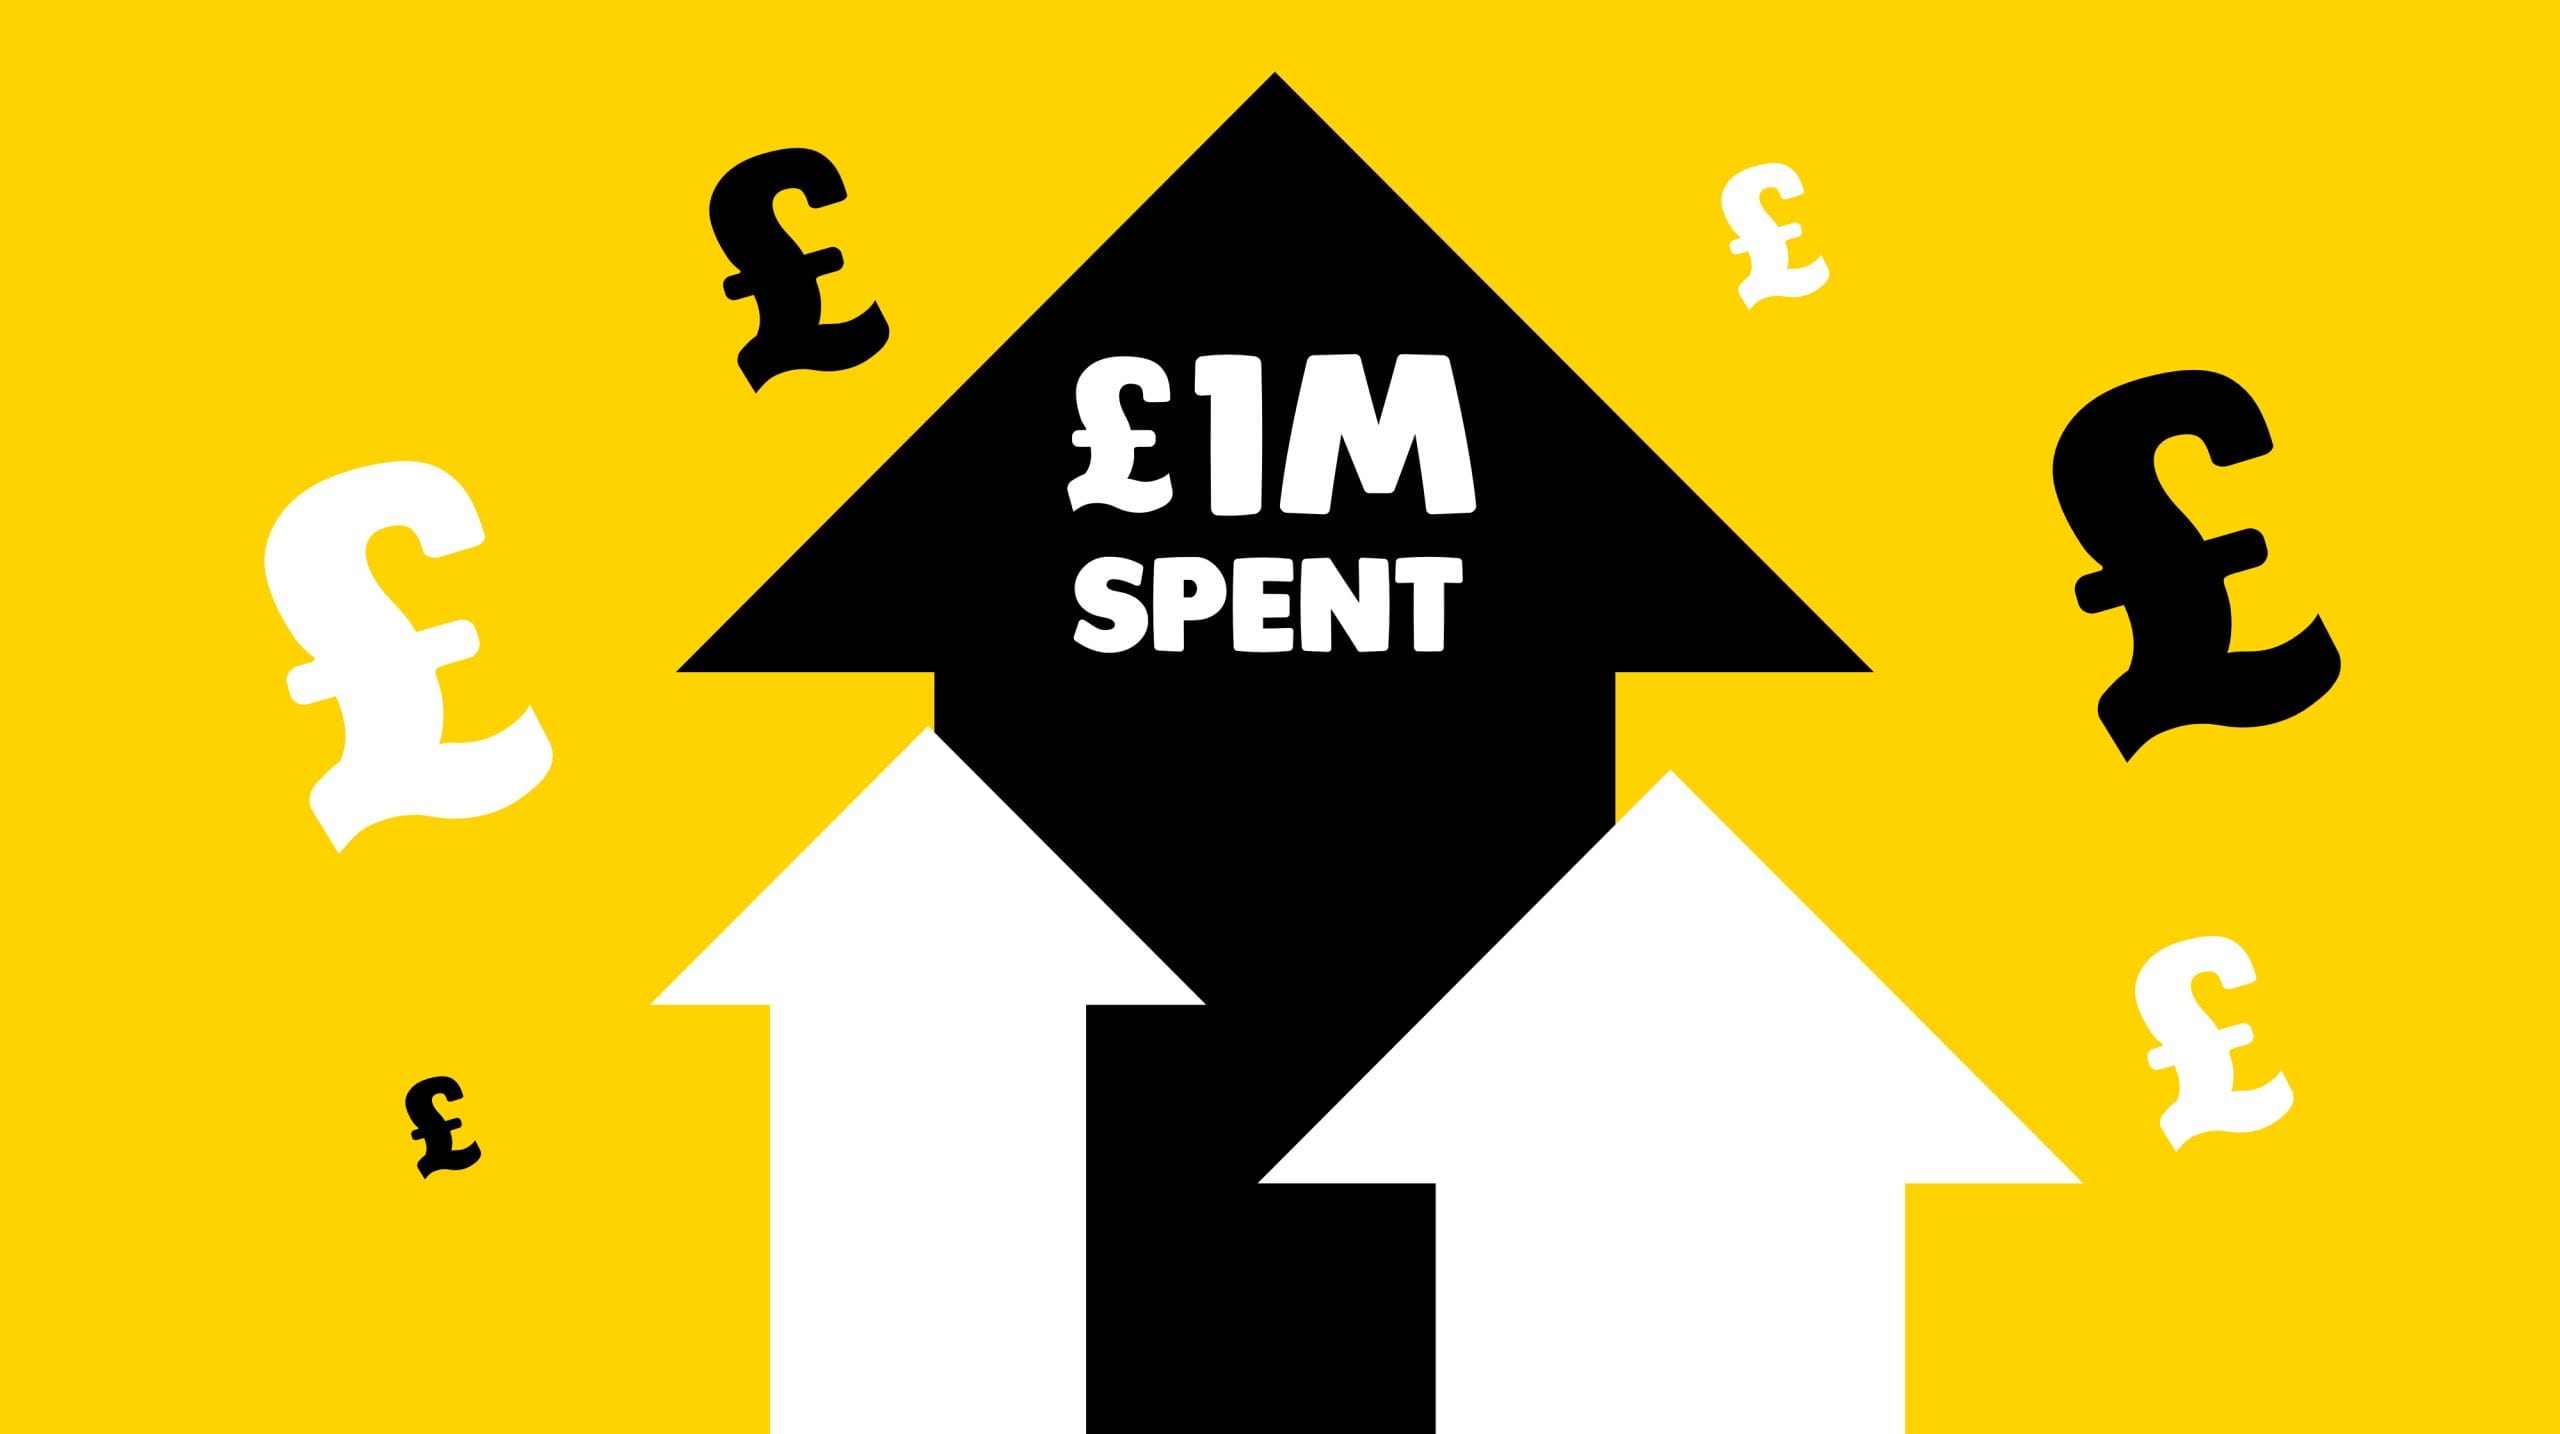 Charity Spending Nearly £1M a Week to Keep People Warm Featured Image